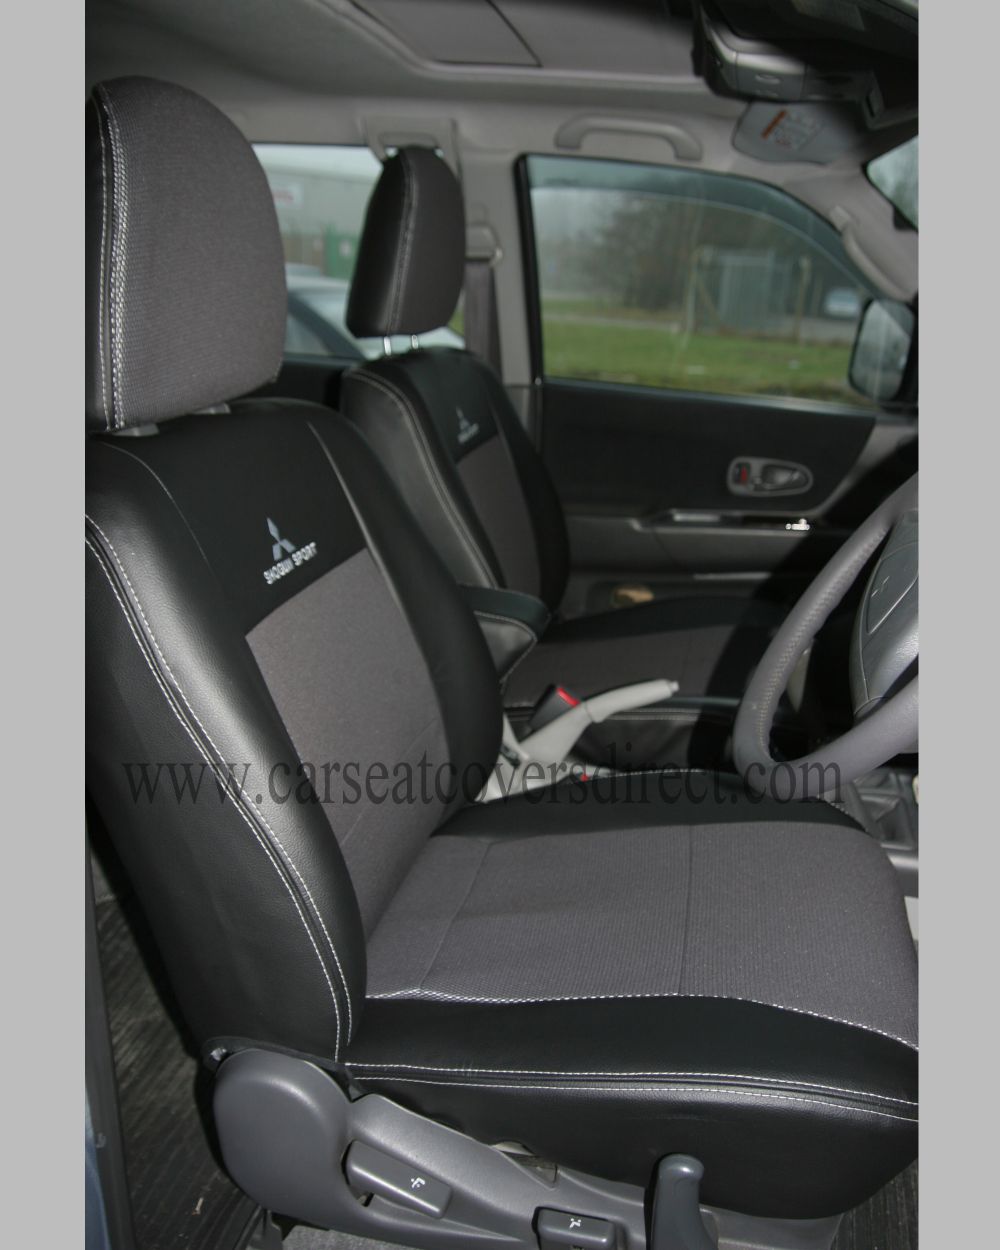 Driver + Passenger Seat Case IH Heavy Duty Seat Covers For Grammer Maximo Dynamic Seat Driver Passenger Seat